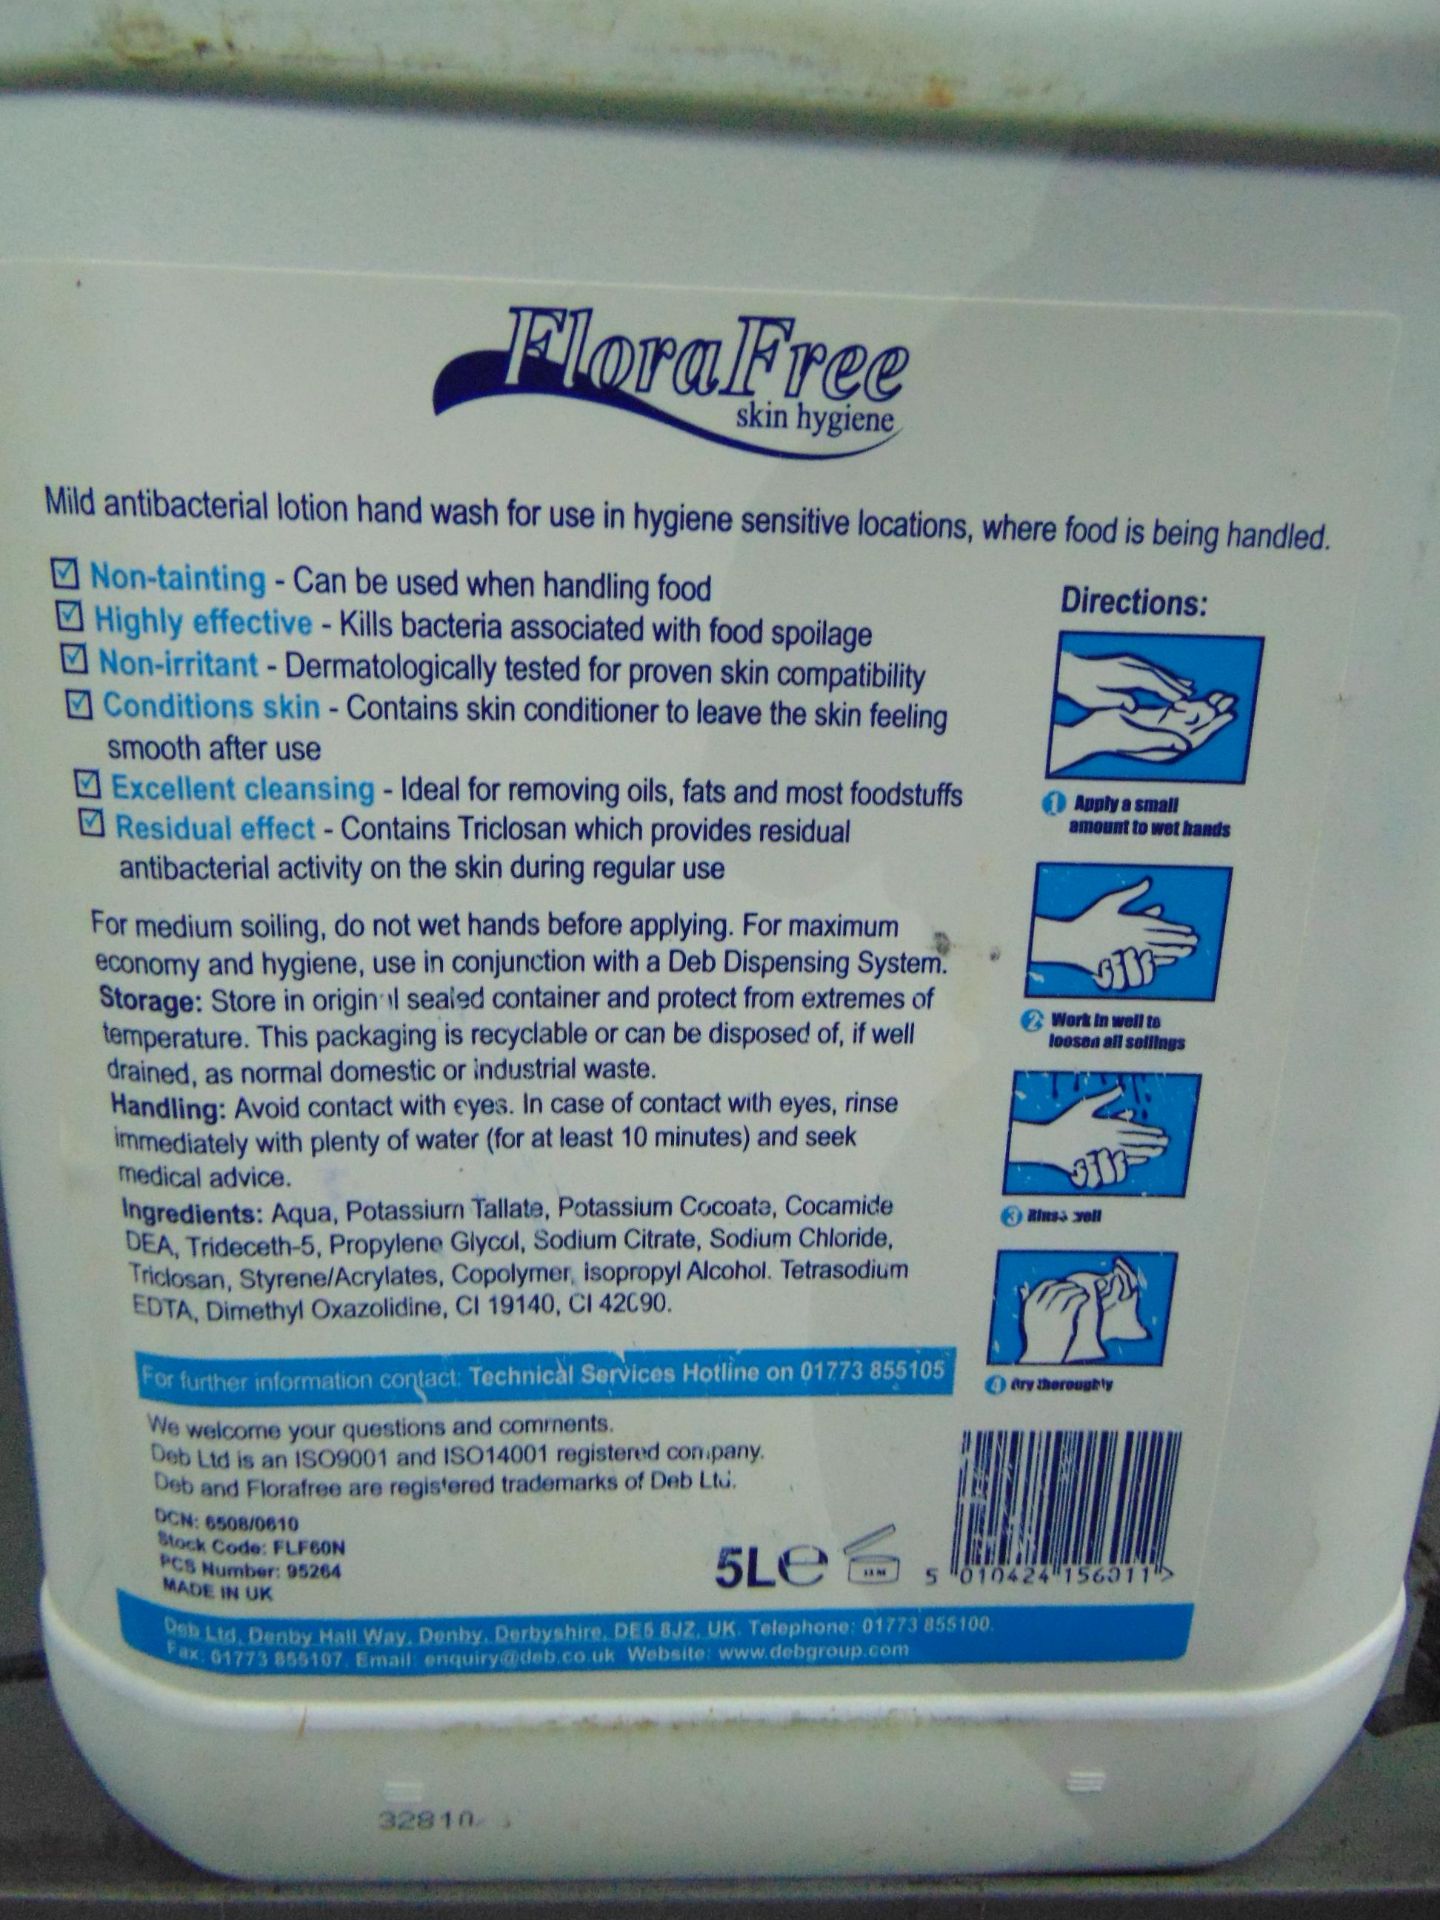 20 x 5 Ltr FloraFree Mild Antibacterial Lotion and Approx 300 Hand/Face Wipes - Image 4 of 6